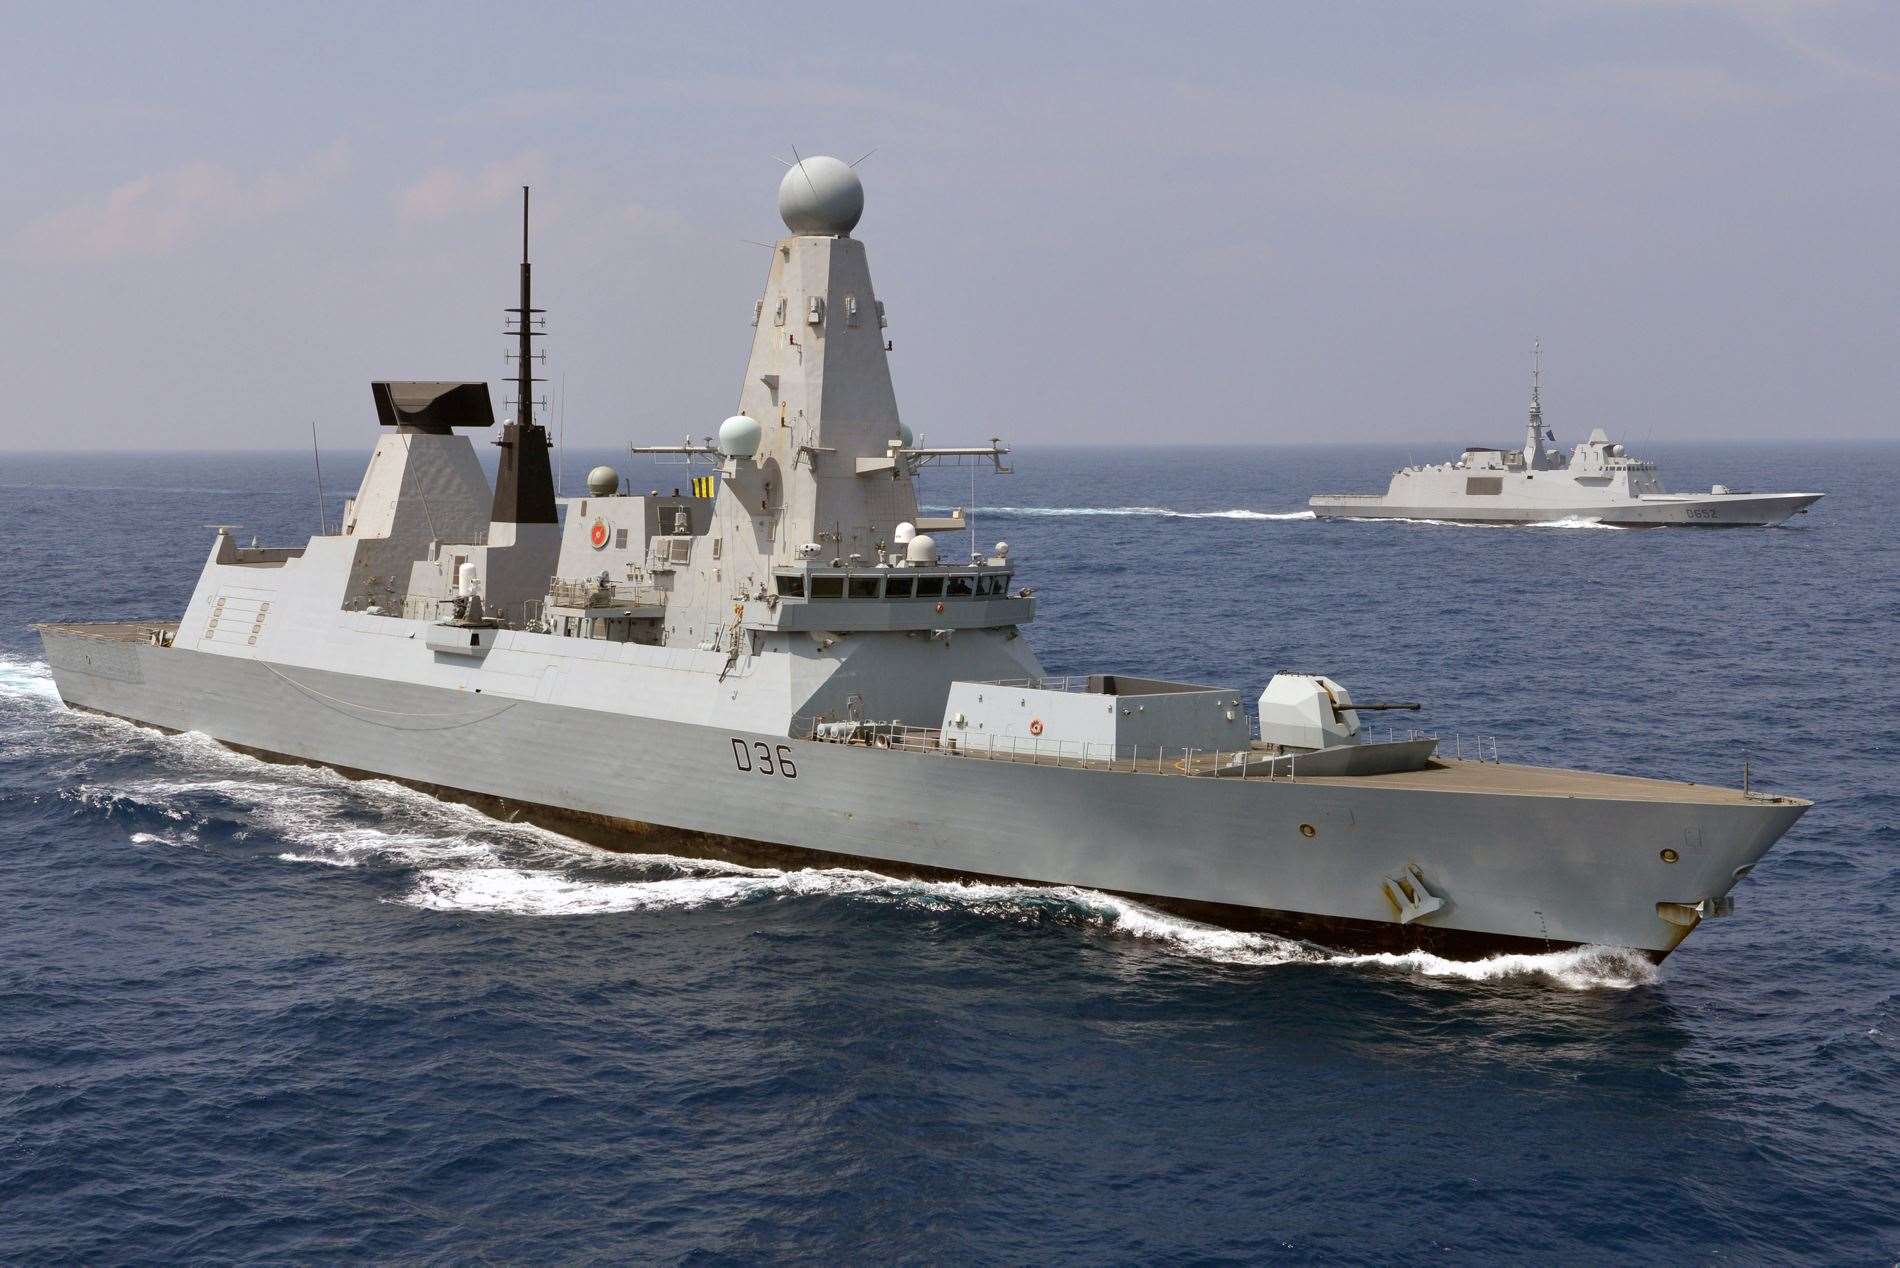 HMS Defender conducting joint military training. Photo: MOD